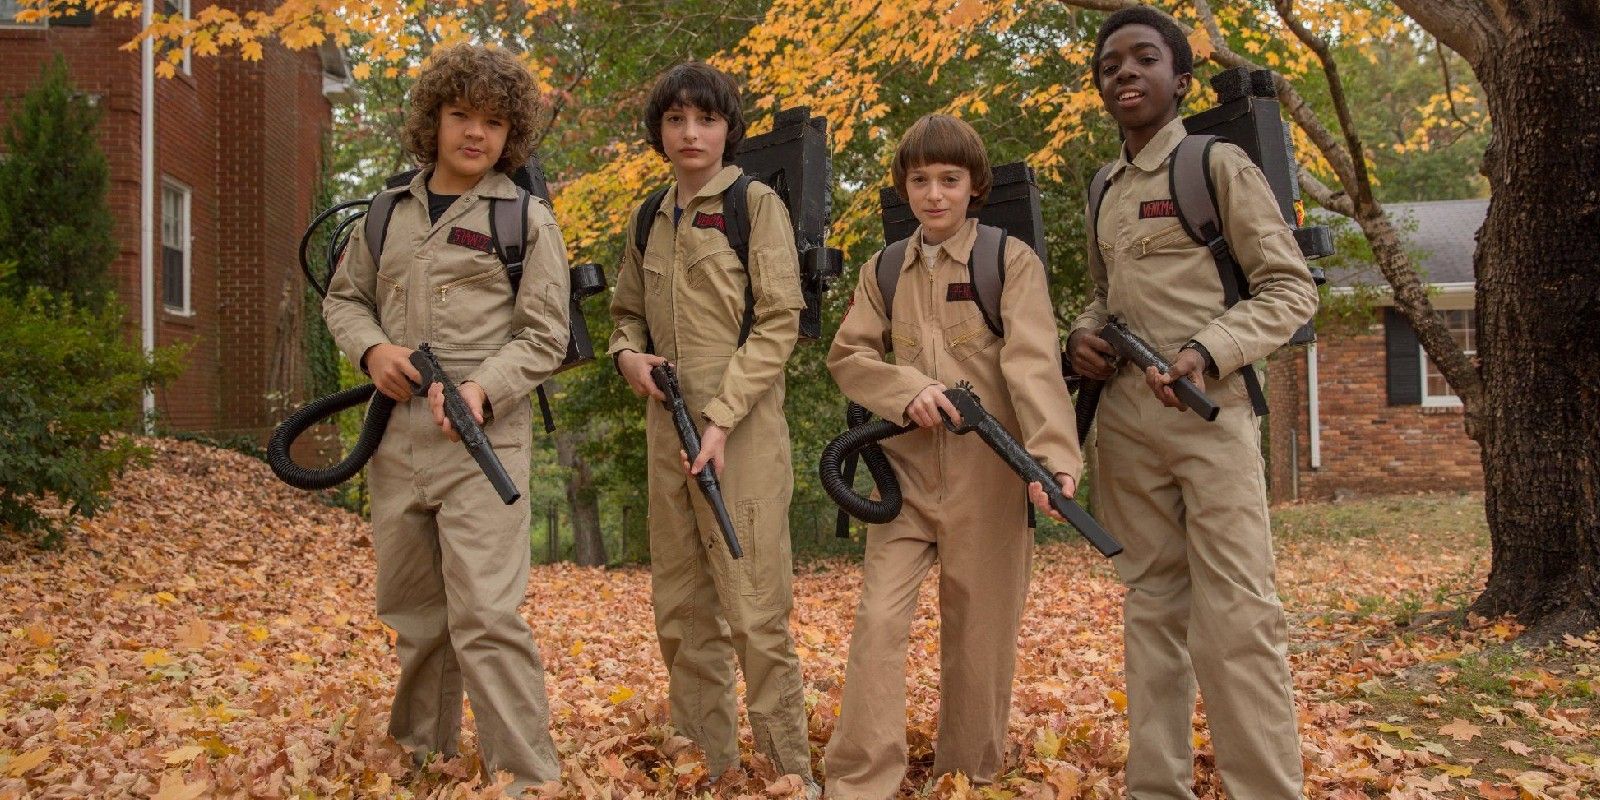 Stranger Things - Dustin, Mike, Will and Lucas in Ghostbusters costumes